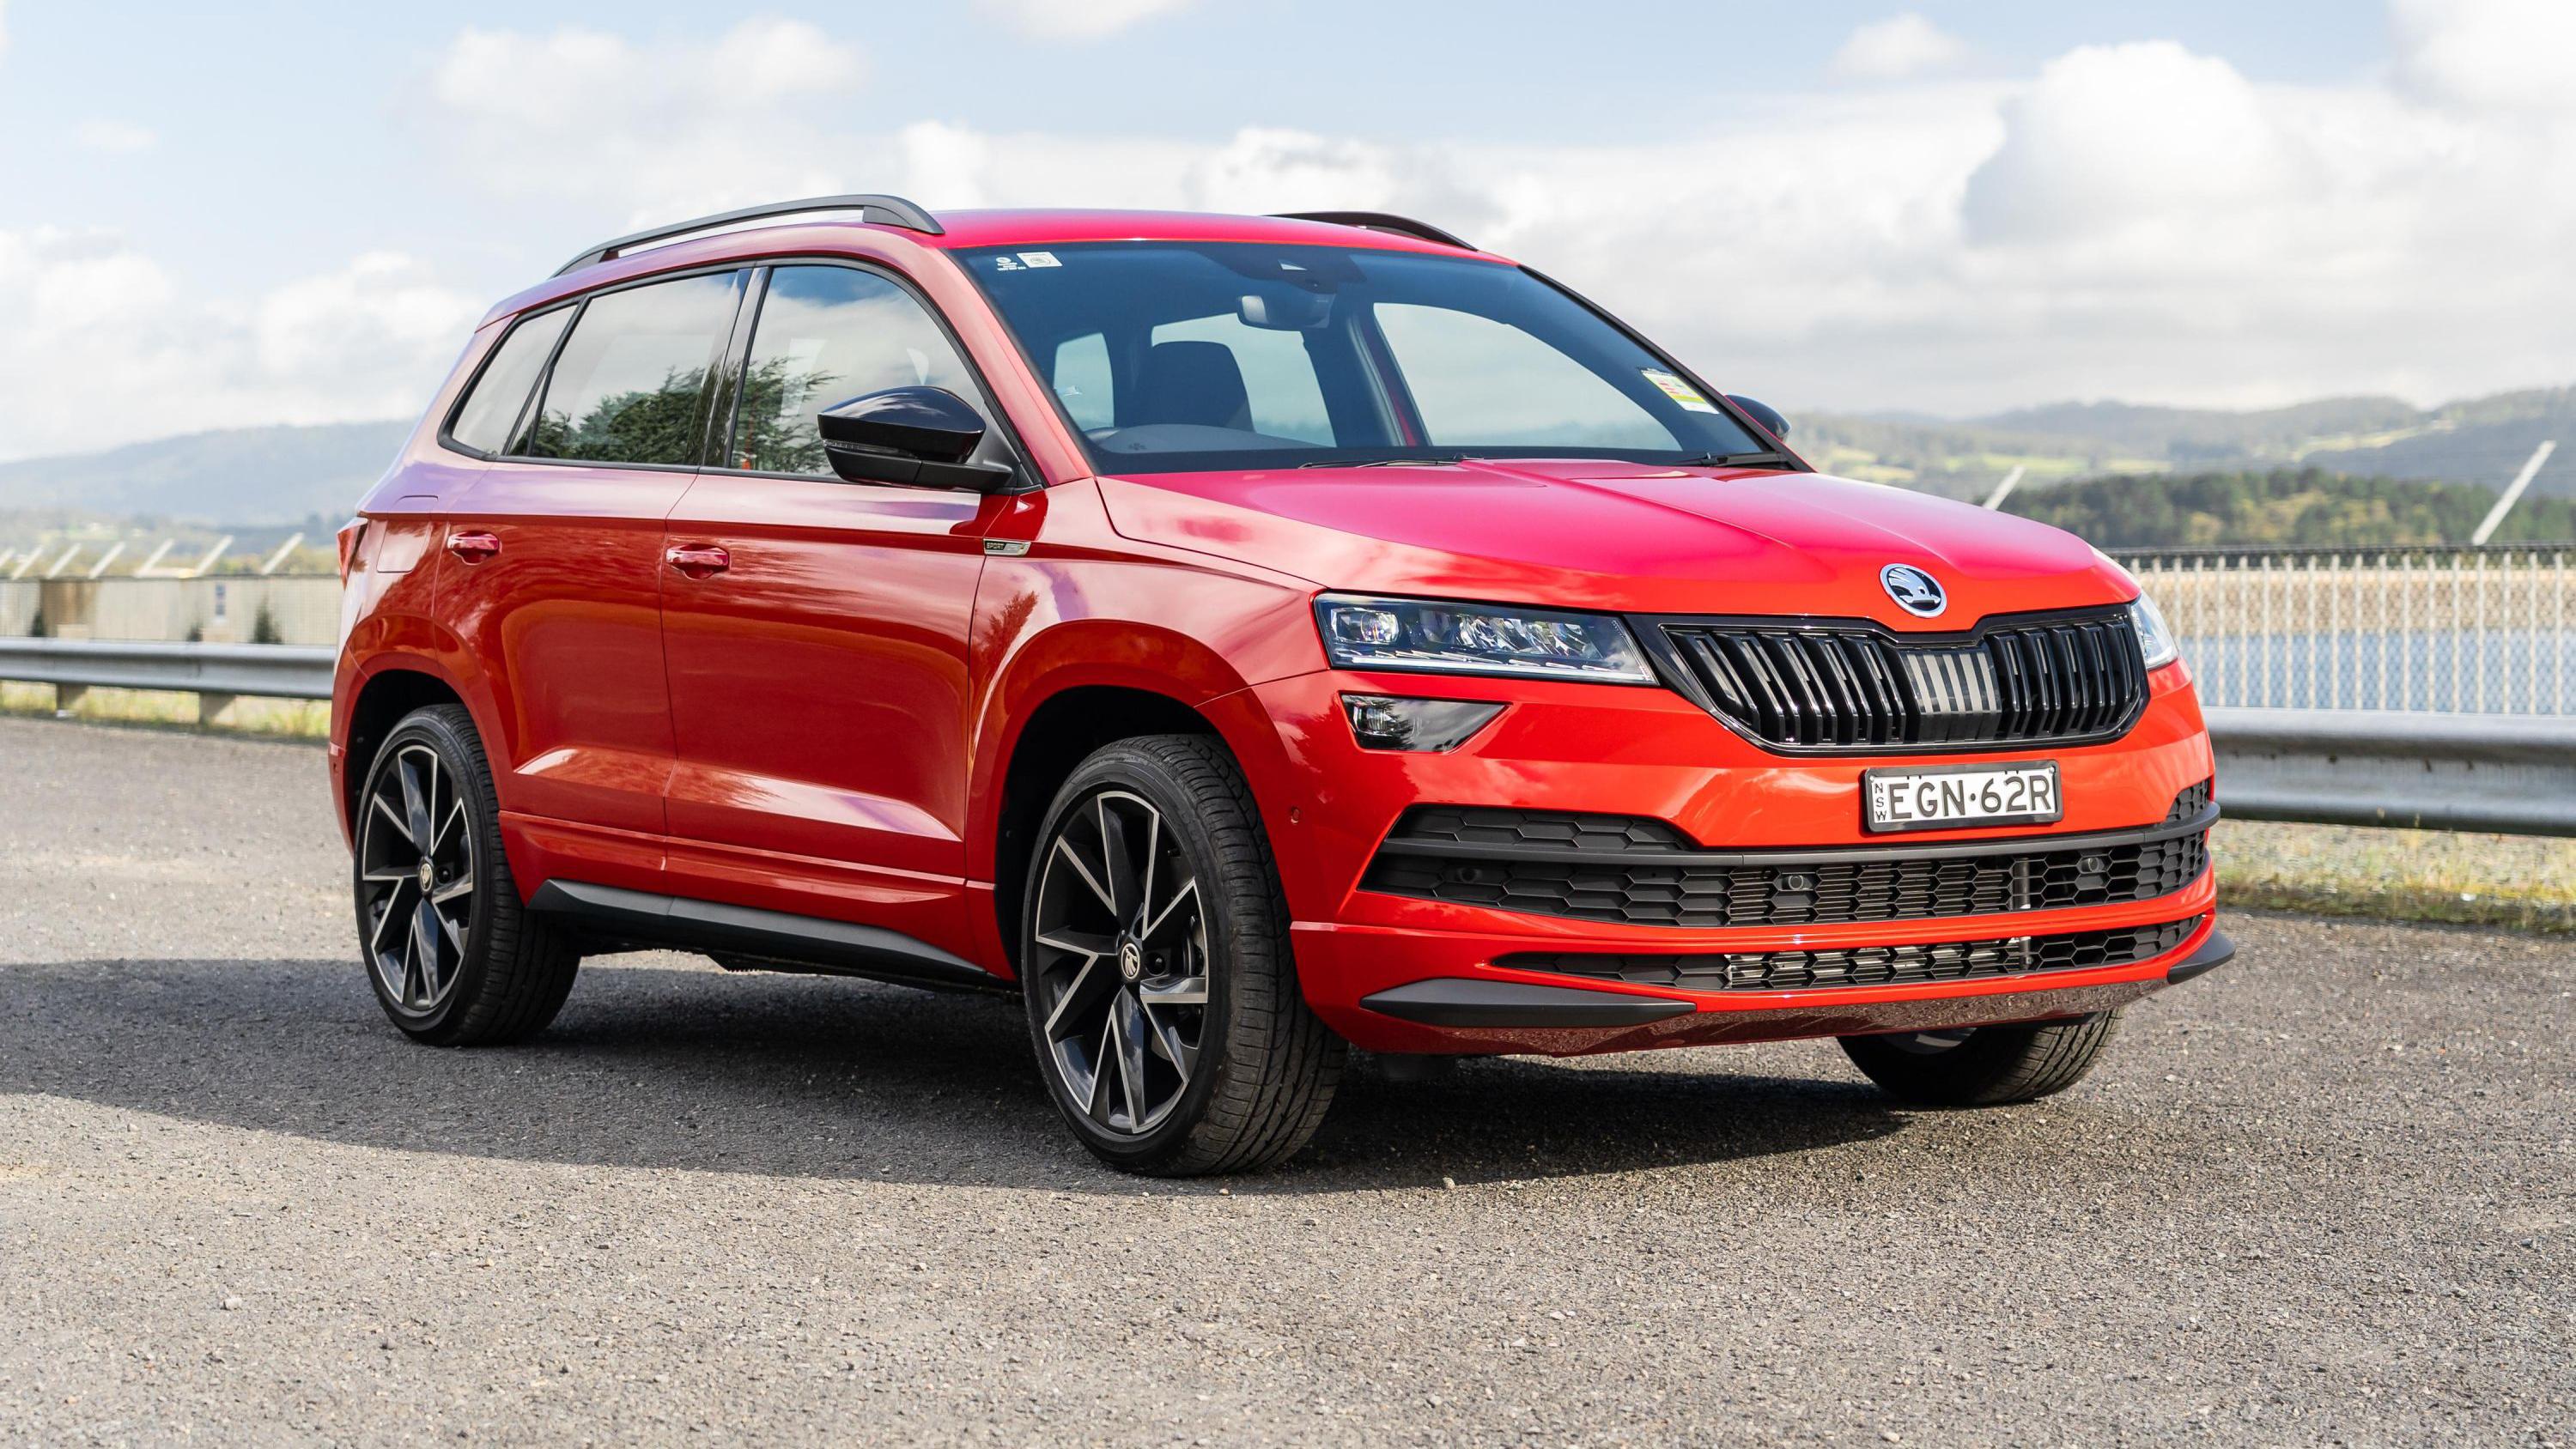 Skoda Karoq Review, Price and Specification